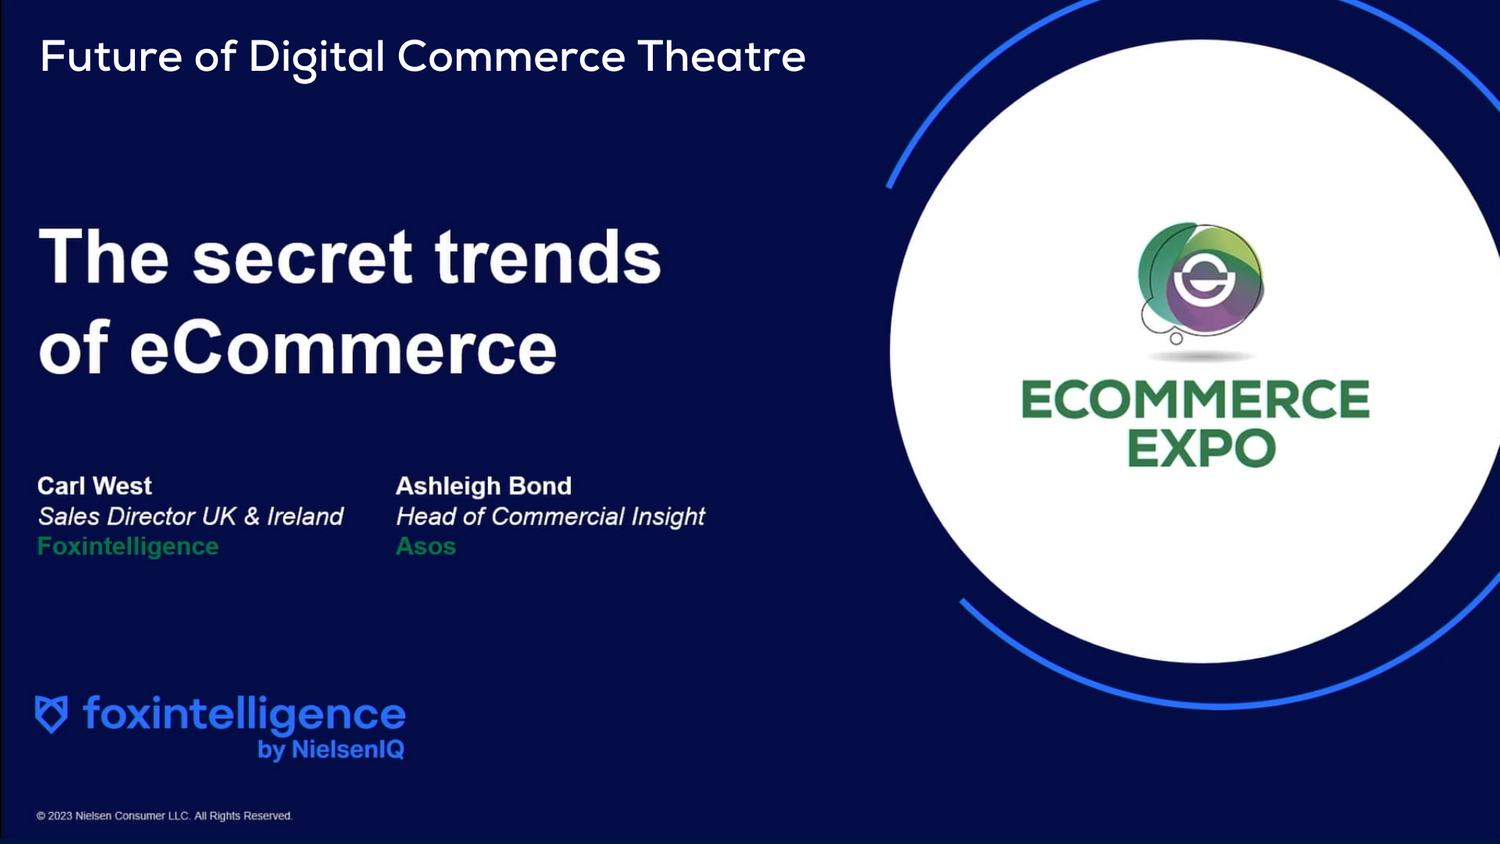 The Secret Trends of eCommerce in 2023